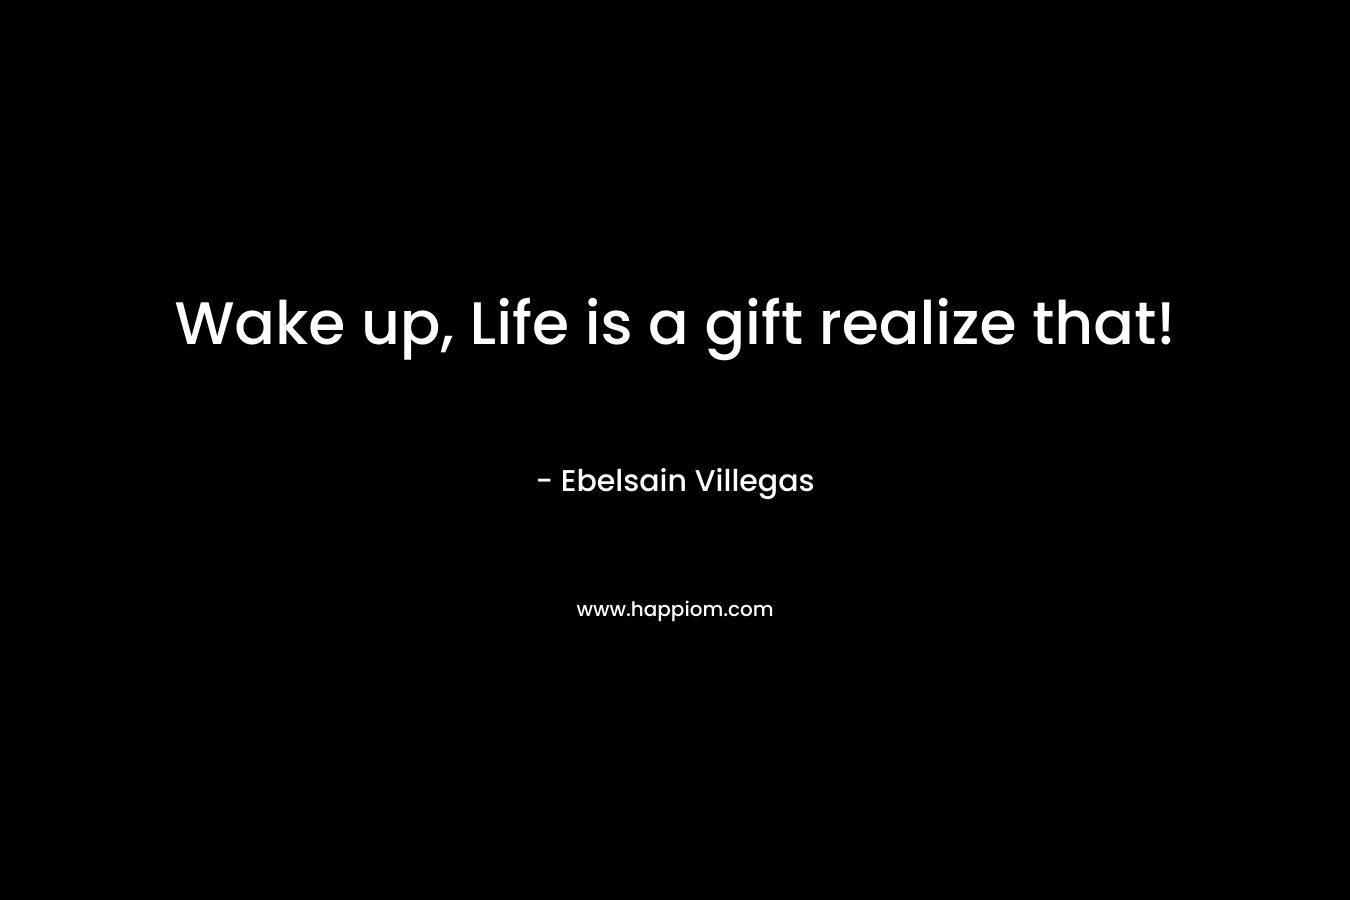 Wake up, Life is a gift realize that!